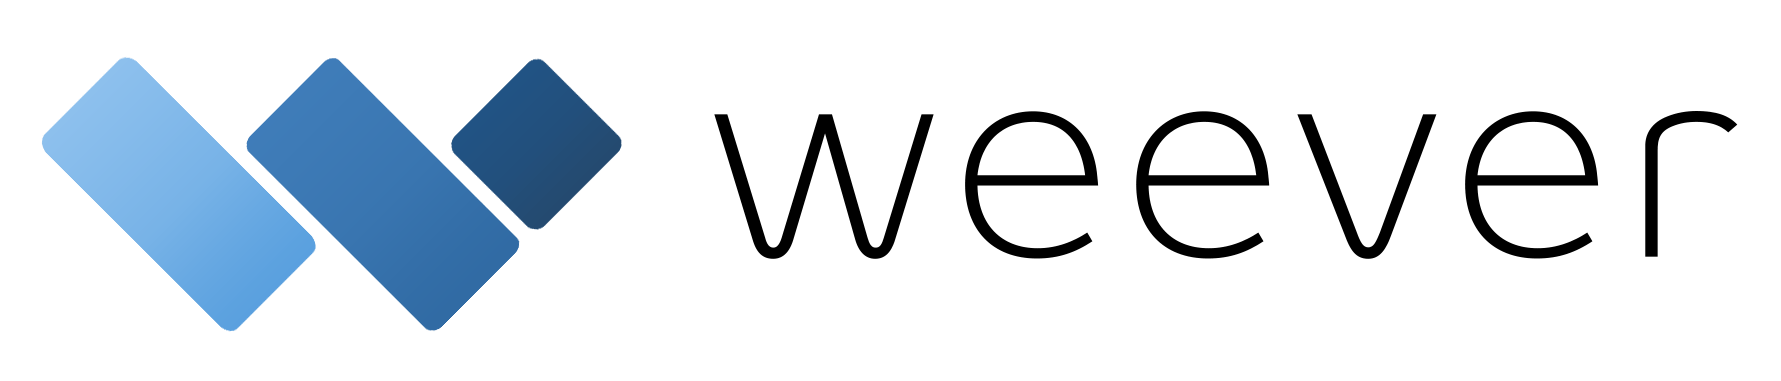 Weever-logo-with-padding